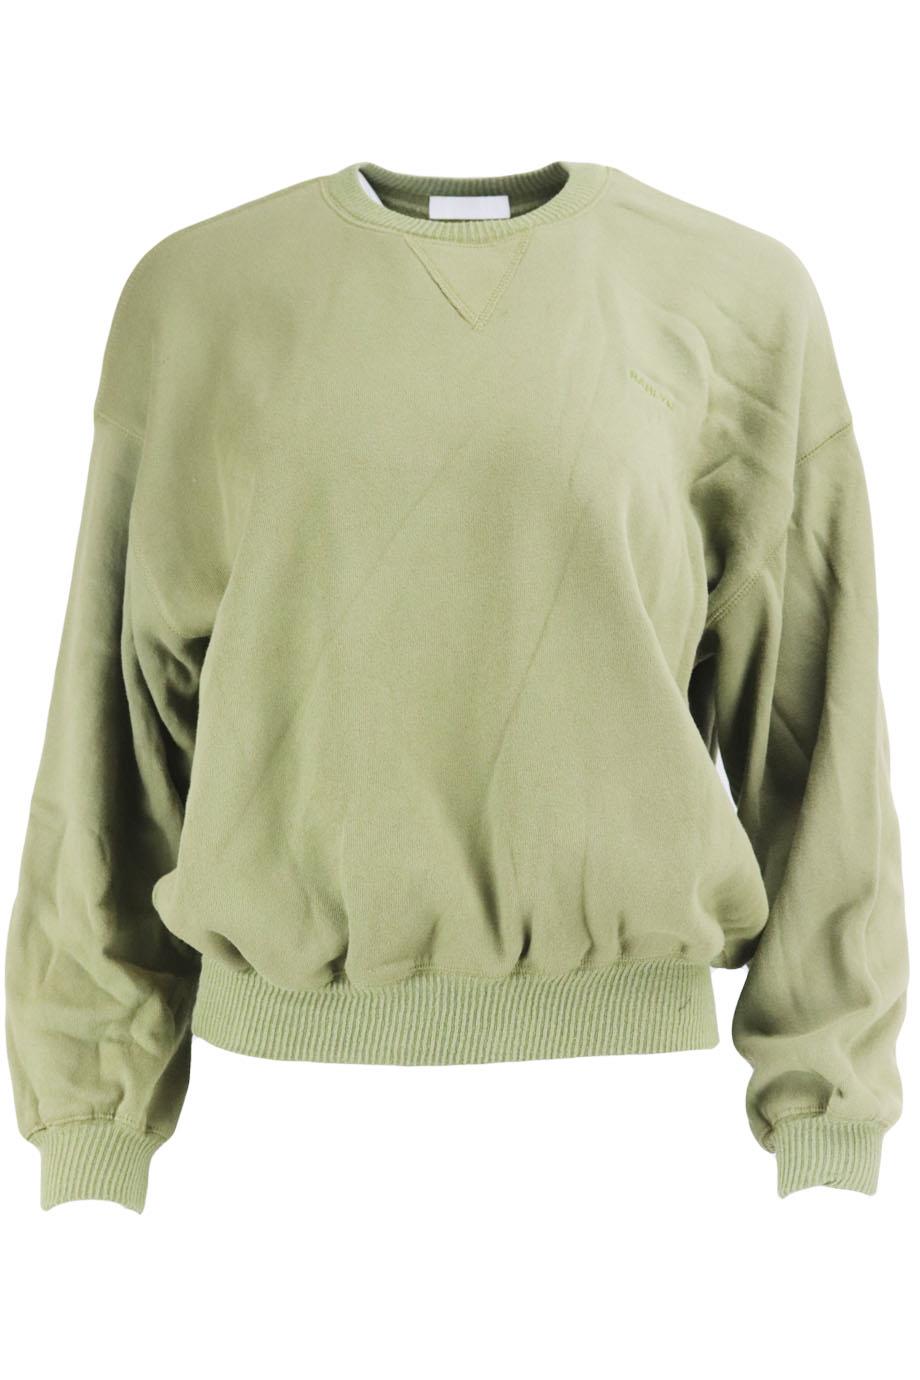 SABLYN EMBROIDERED COTTON JERSEY SWEATSHIRT SMALL